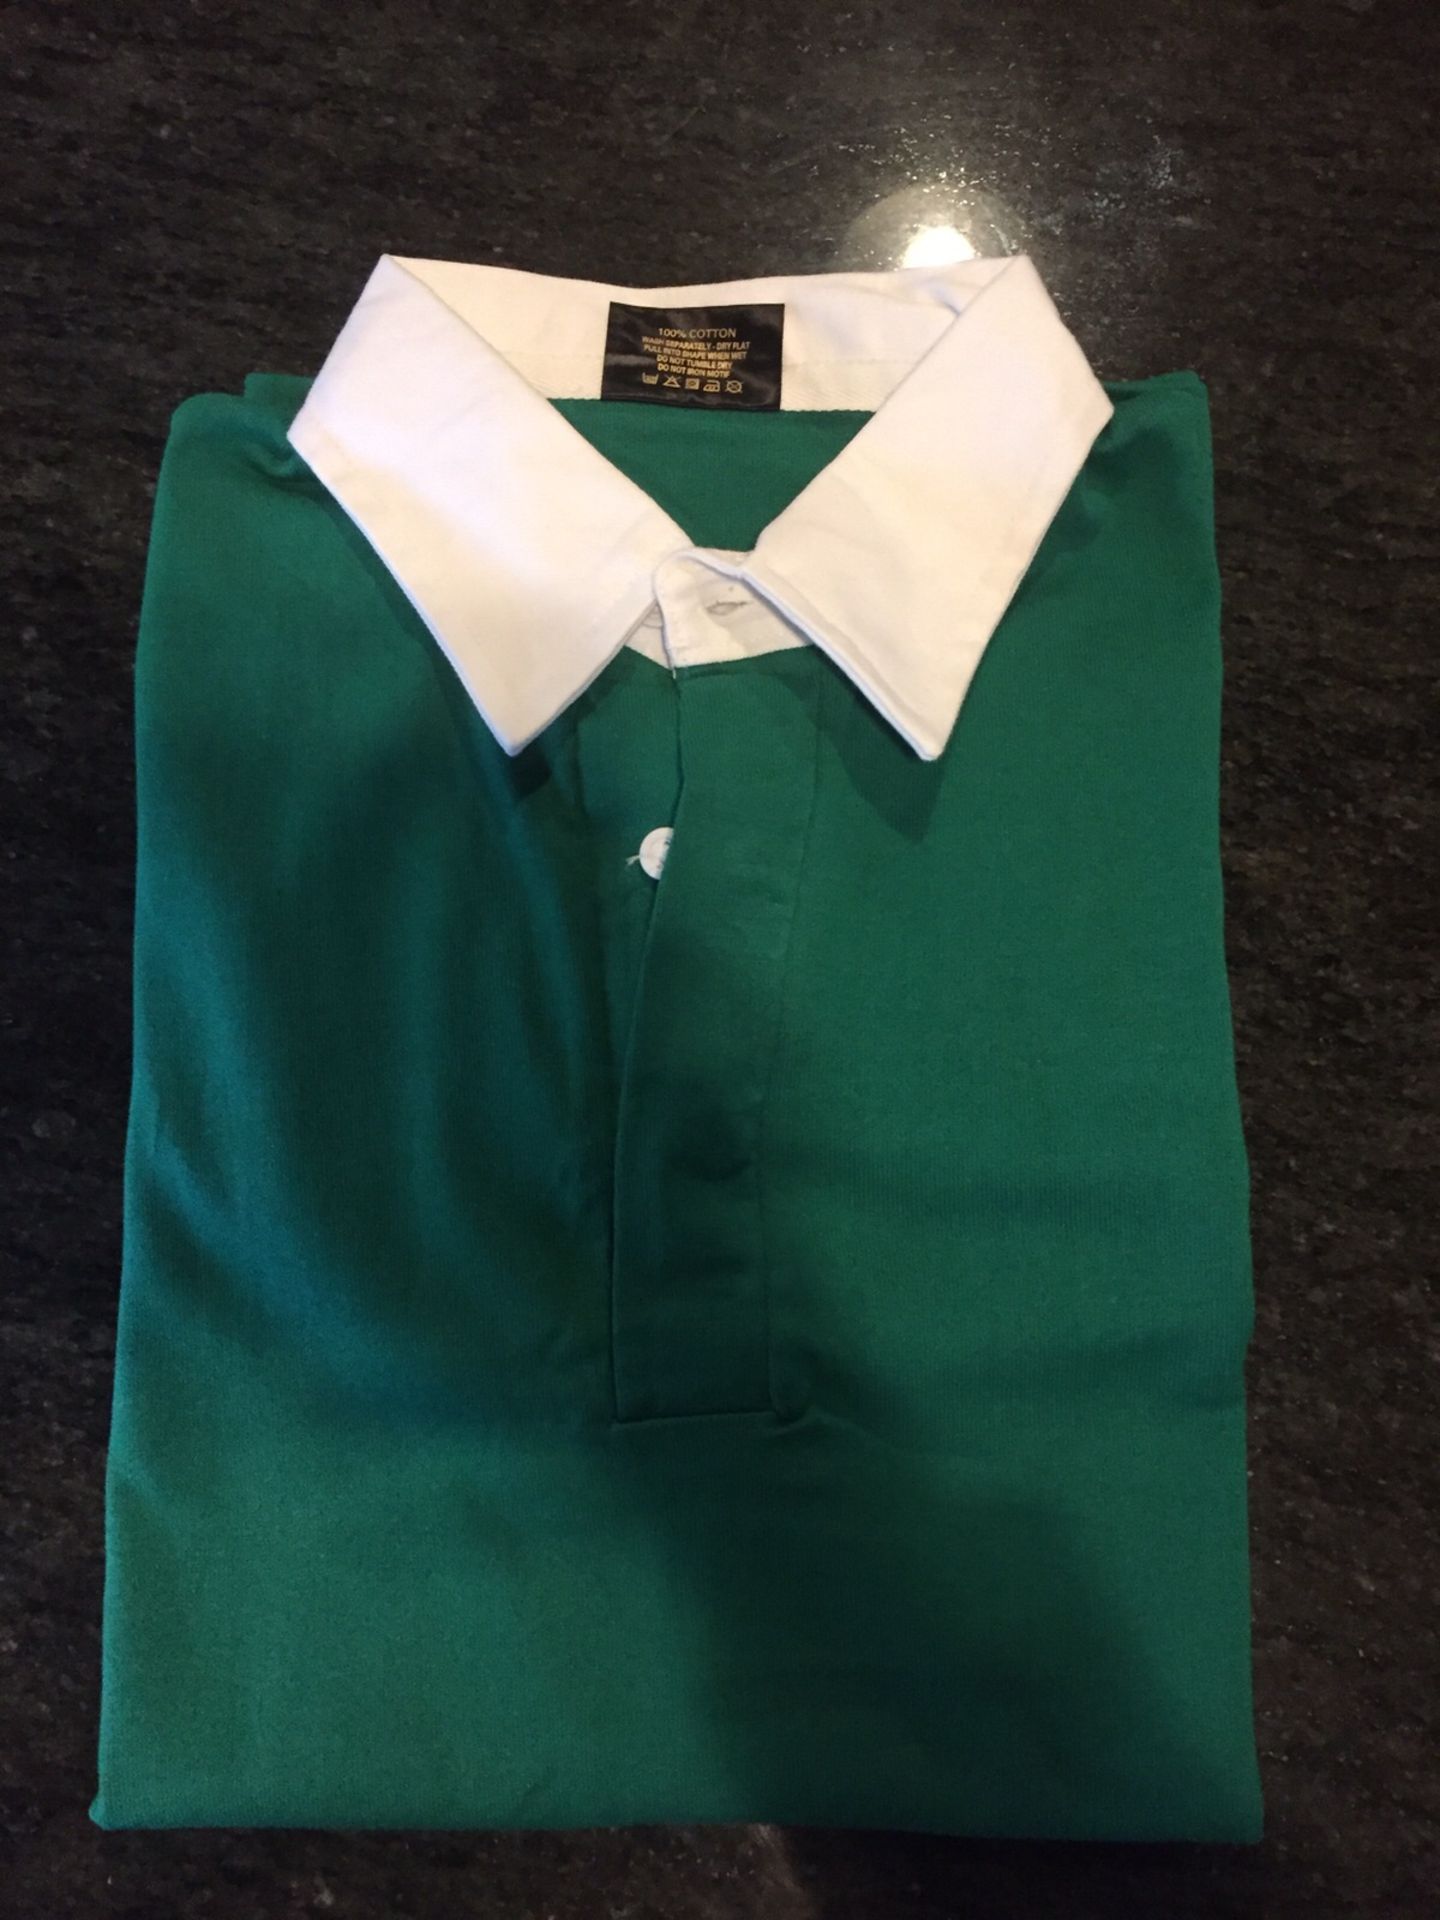 BRAND NEW! Job Lot of HIGH QUALITY 35 Mens Green Guinness Rugby Shirts Large £60 RESERVE